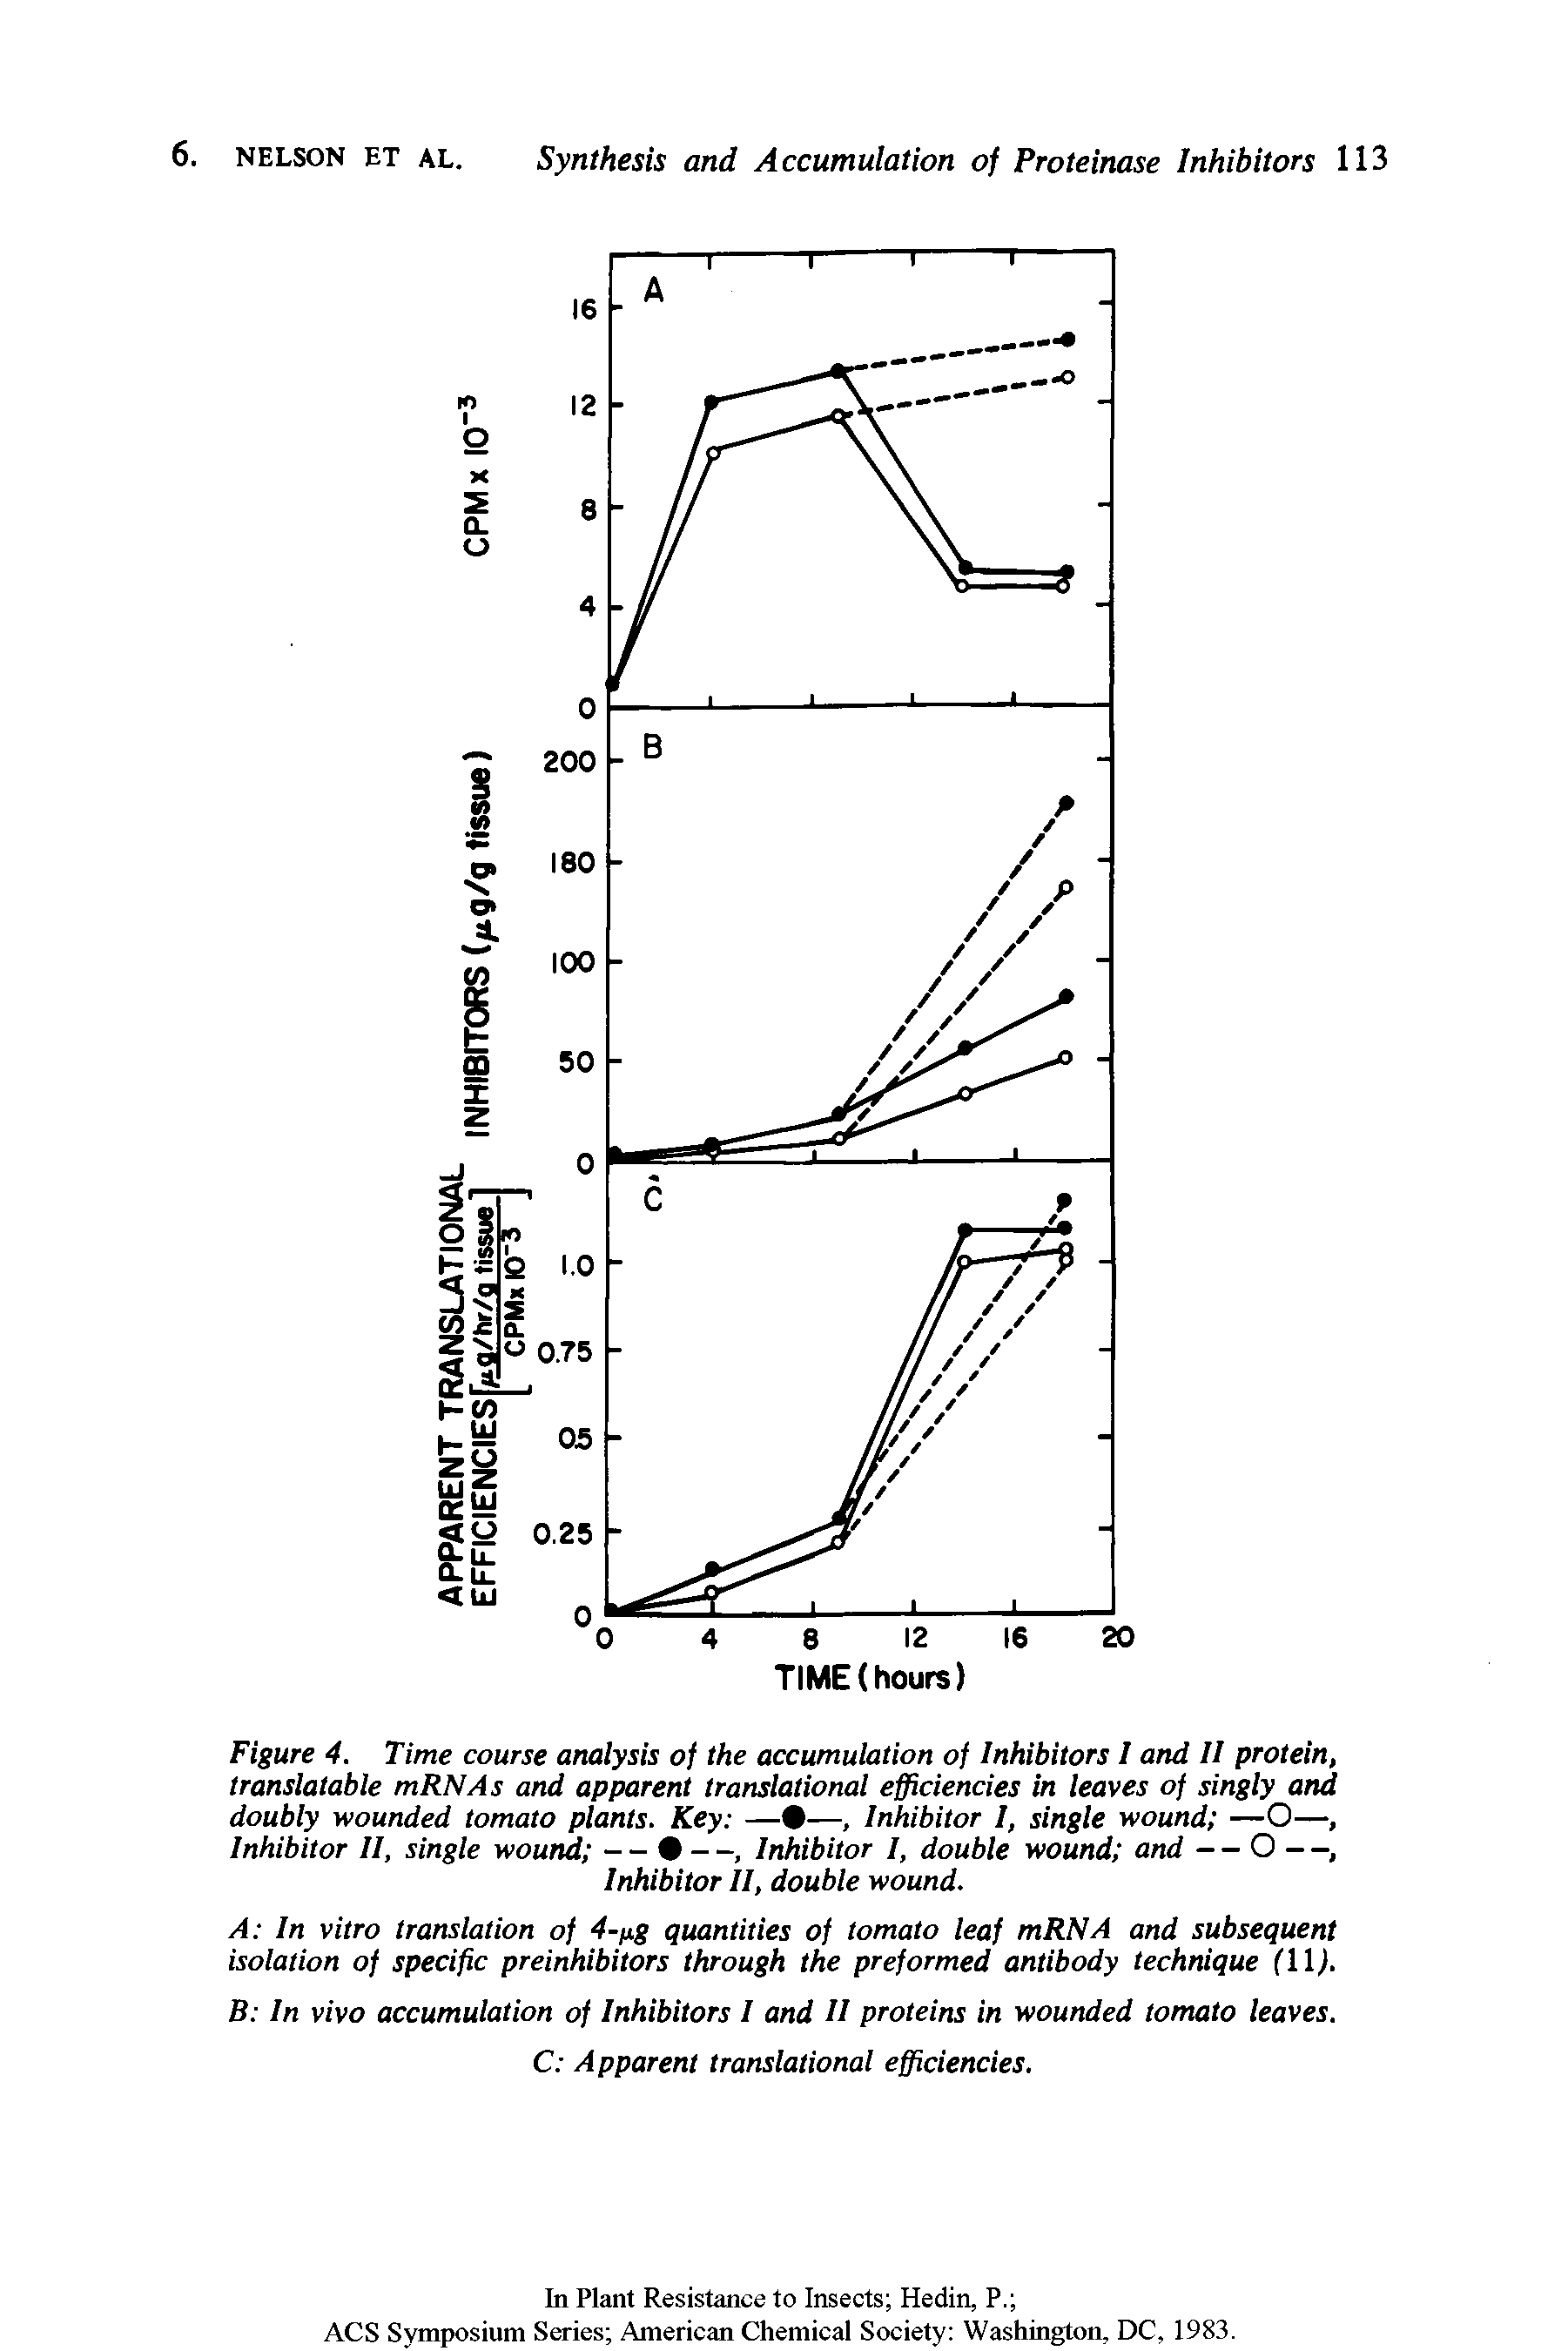 Figure 4. Time course analysis of the accumulation of Inhibitors I and II protein, translatable mRNAs and apparent translational efficiencies in leaves of singly and doubly wounded tomato plants. Key — —, Inhibitor I, single wound —O—, Inhibitor II, single wound — 9 —, Inhibitor I, double wound and — O —, Inhibitor II, double wound.